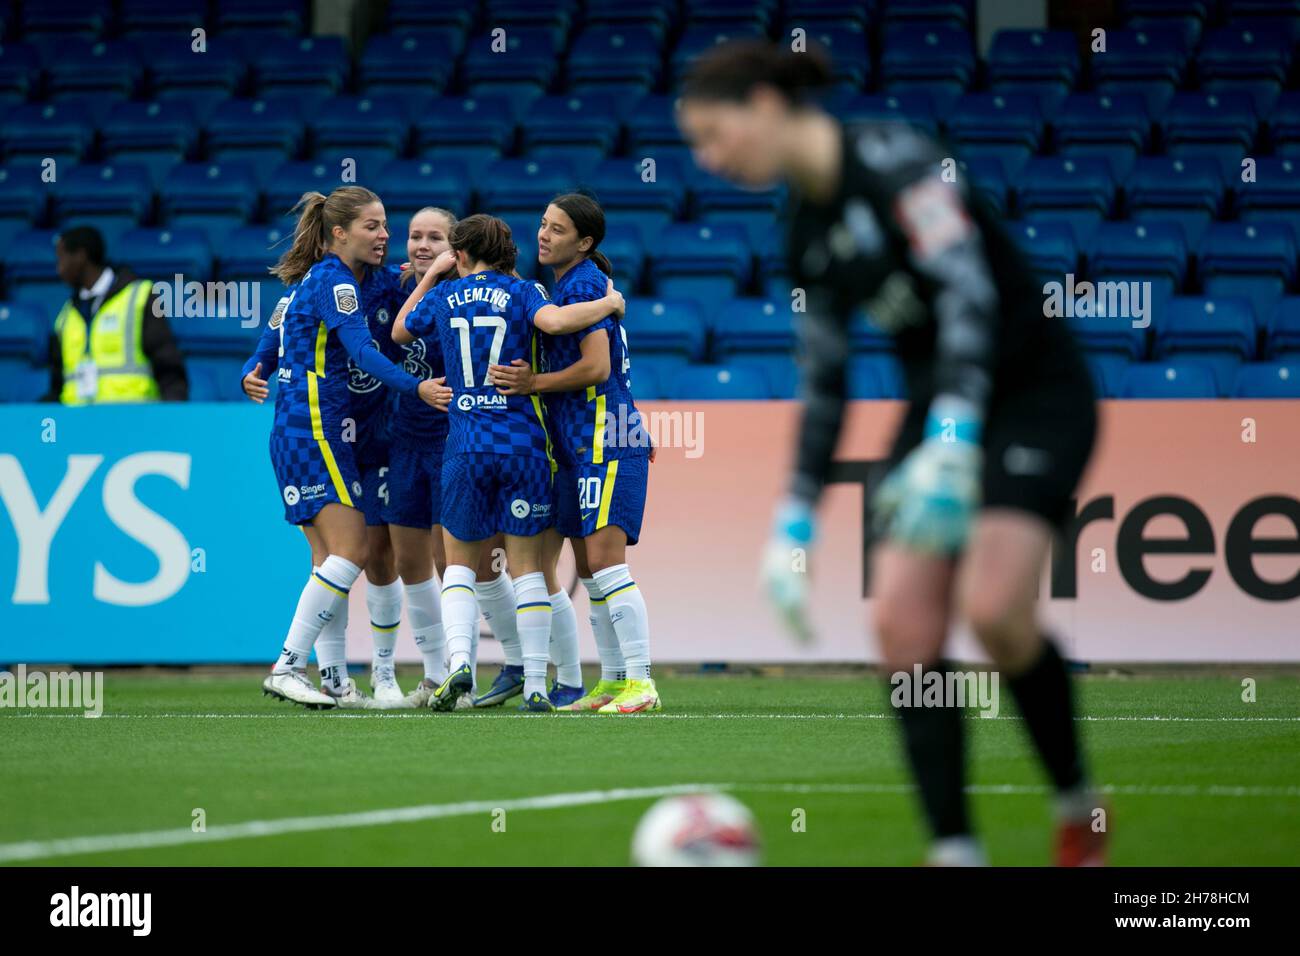 London, UK. 21st Nov, 2021. LONDON, UK. NOVEMBER 21ST : Fran Kirby of Chelsea FC celebrates after scoring during the 2021-22 FA Womens Superleague fixture between Chelsea FC and Birmingham City at Kingsmeadow. Credit: Federico Guerra Morán/Alamy Live News Stock Photo